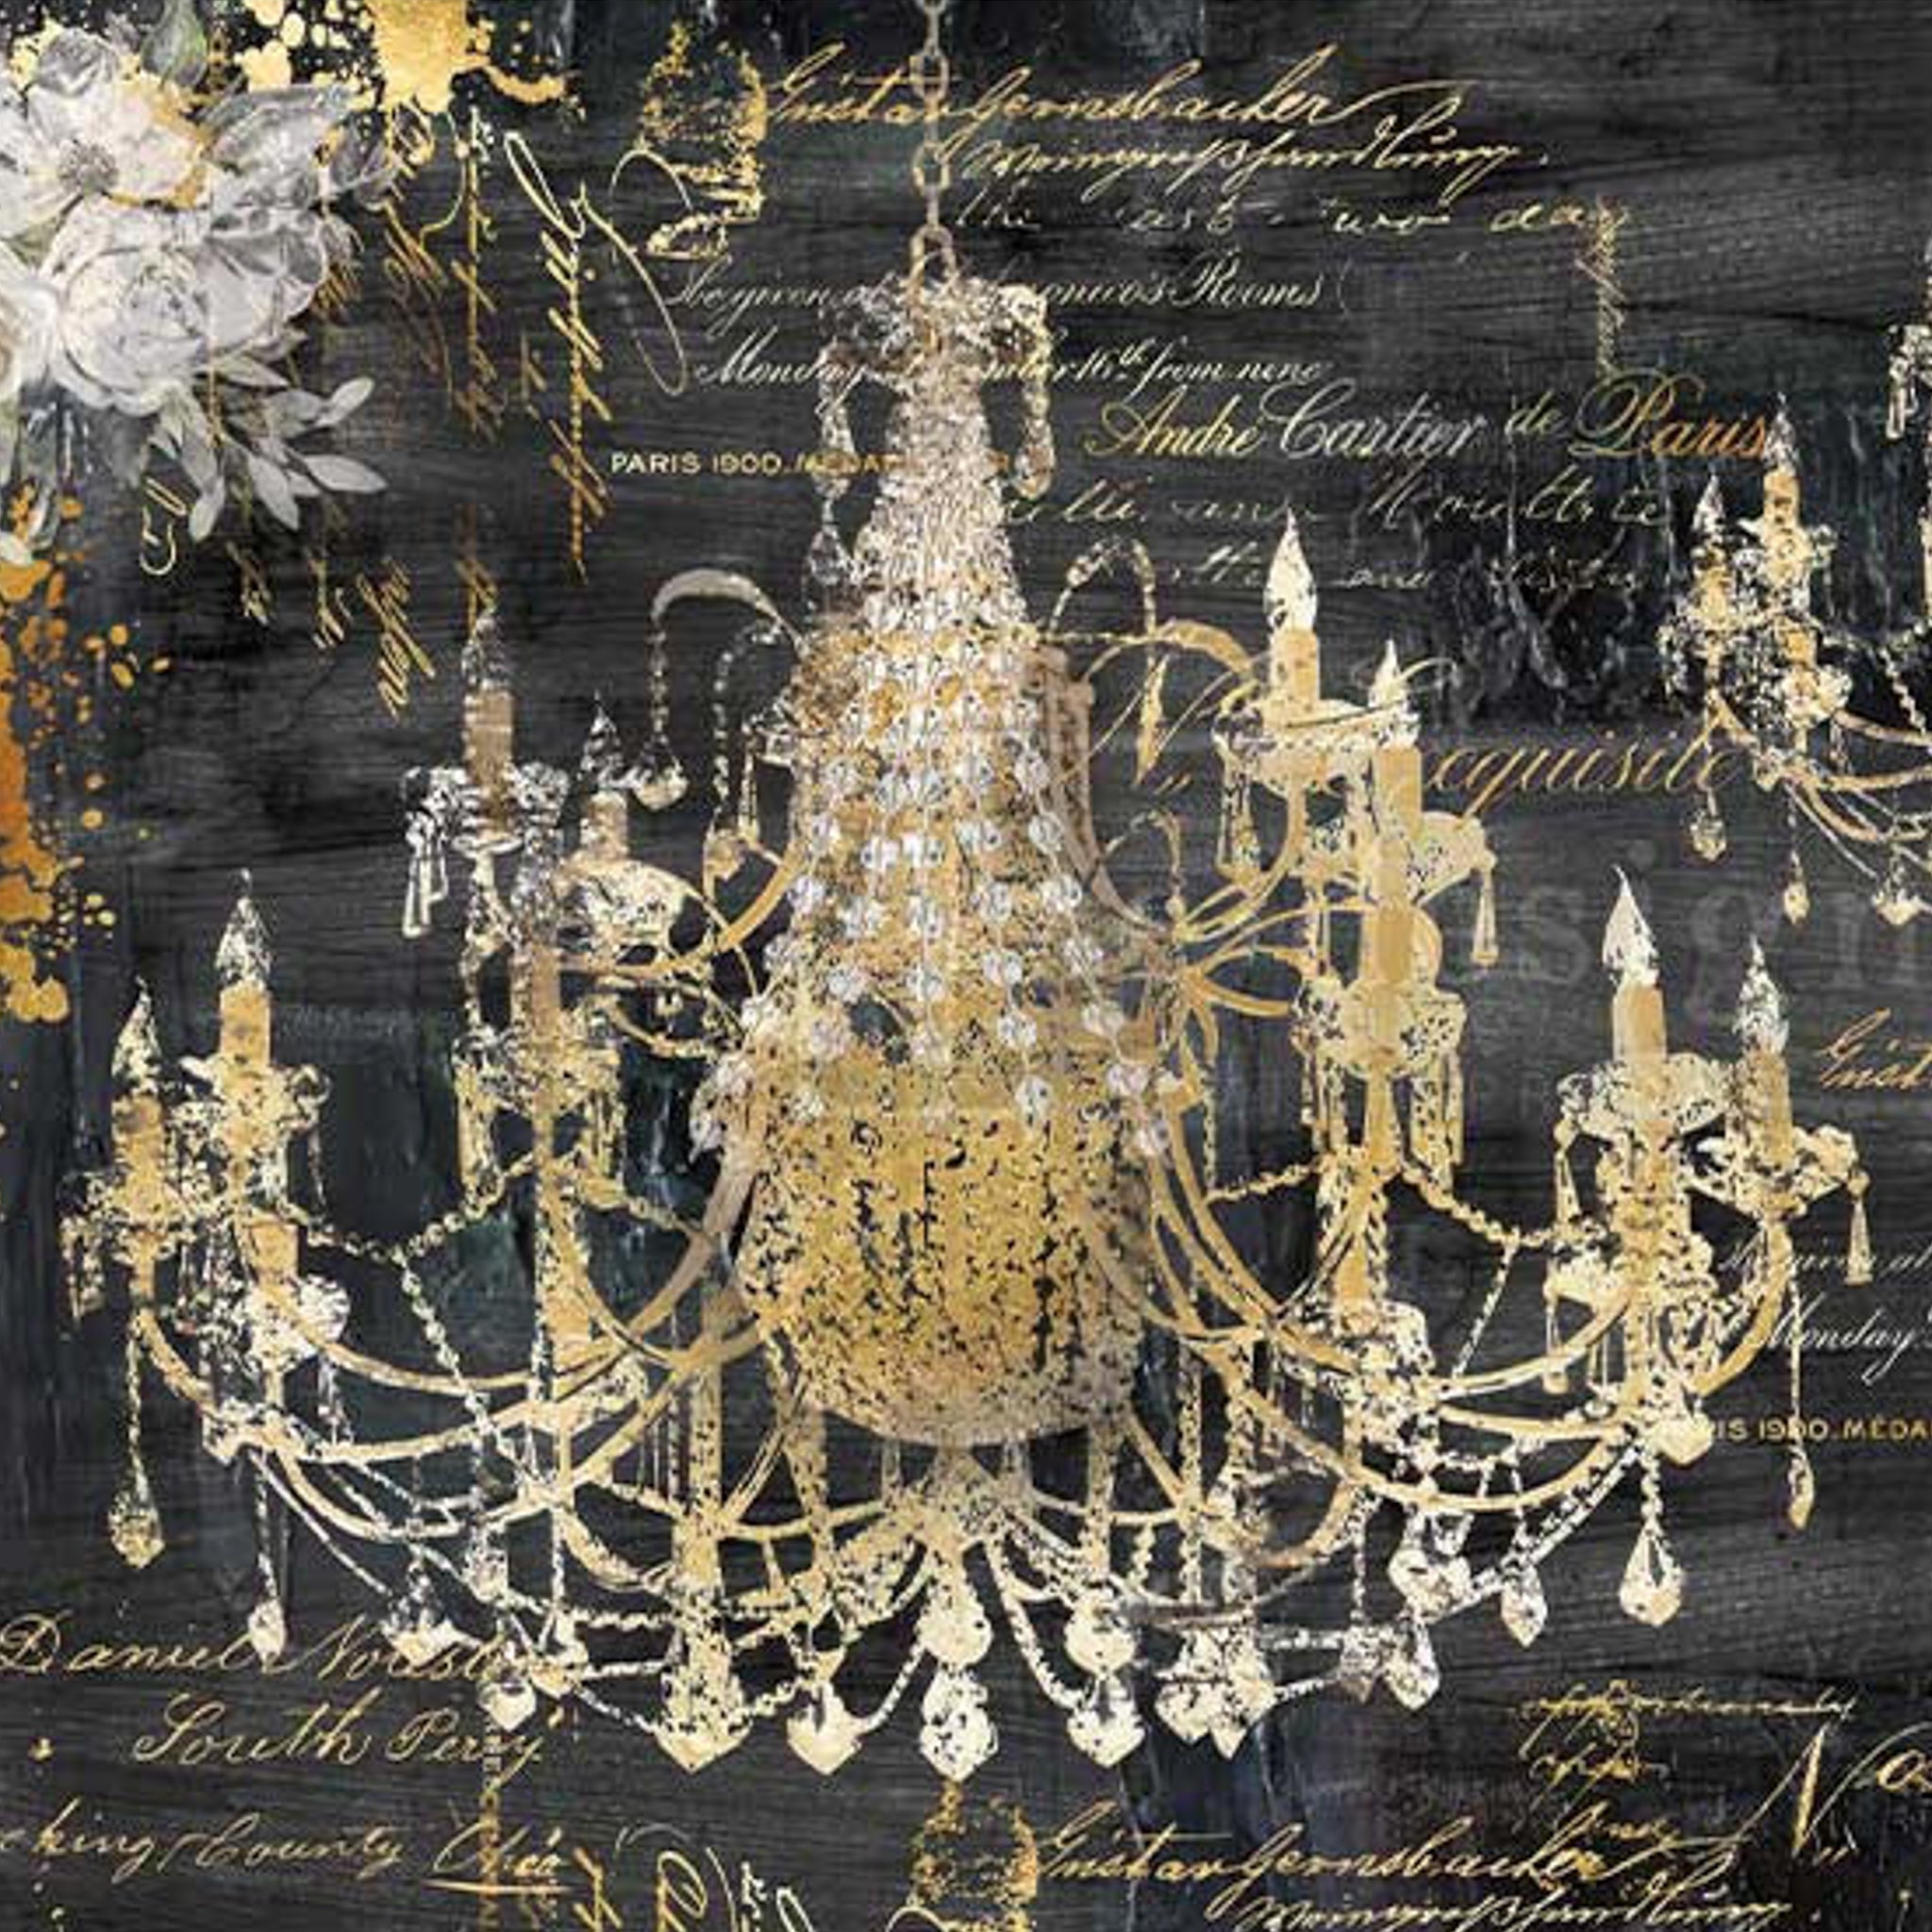 Tissue paper featuring beautifully layered chandeliers, script, flowers, and gold ink splatters.